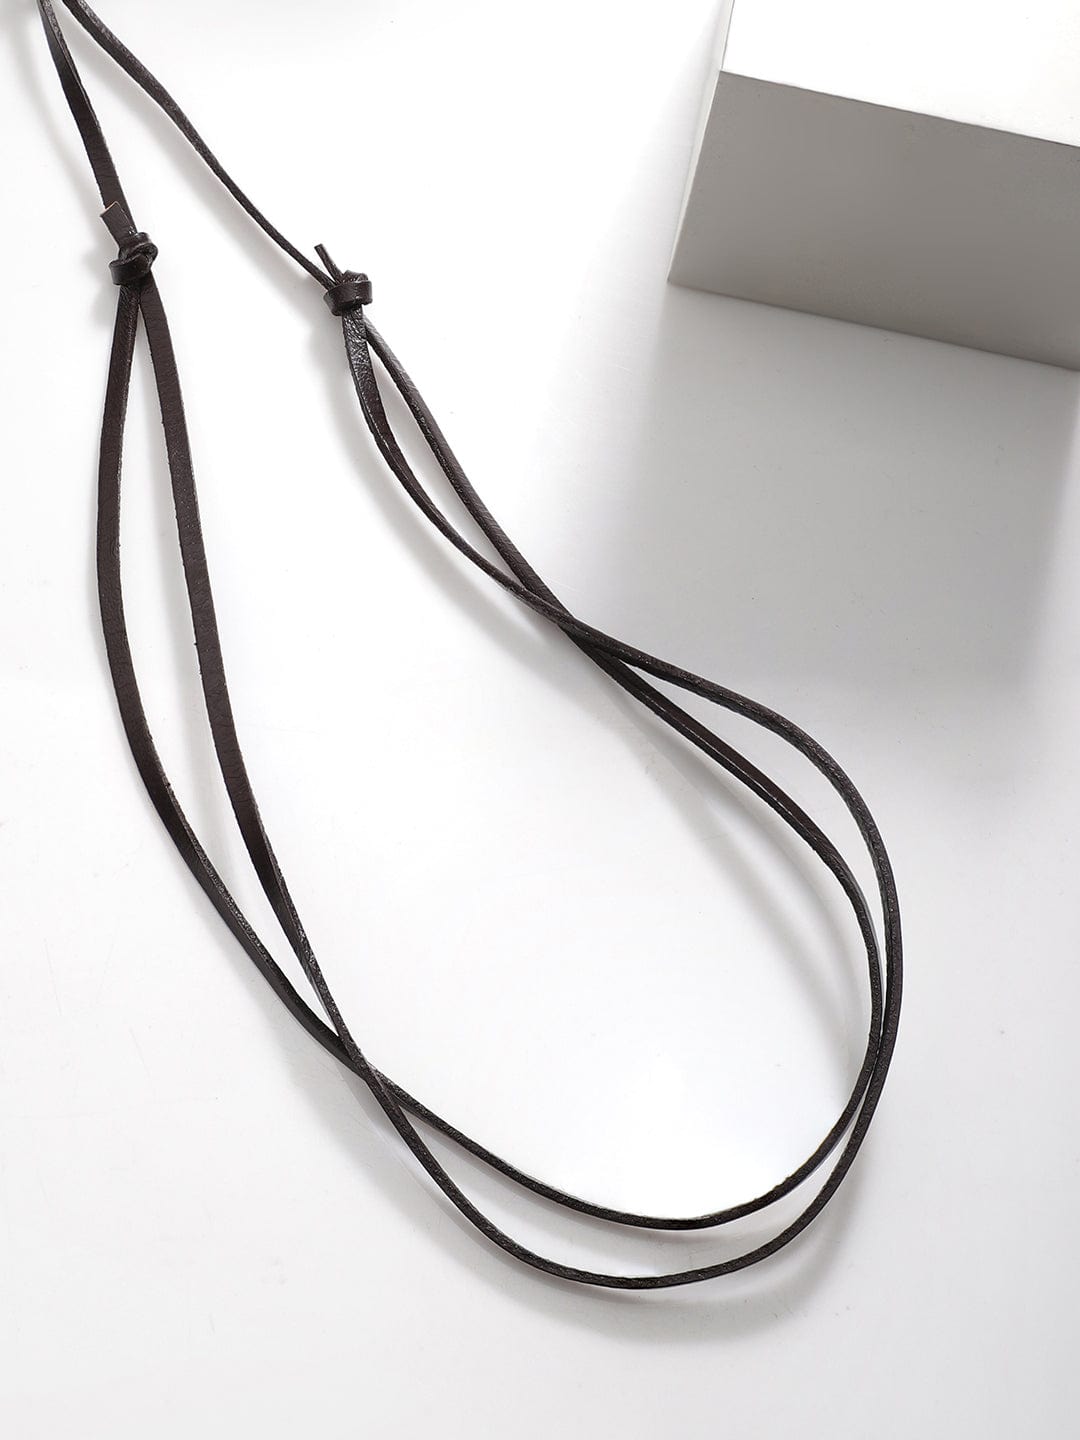 Rubans Voguish Men Brown Lather Adjustable Necklace With Arrow Pendant. Necklace and Chains